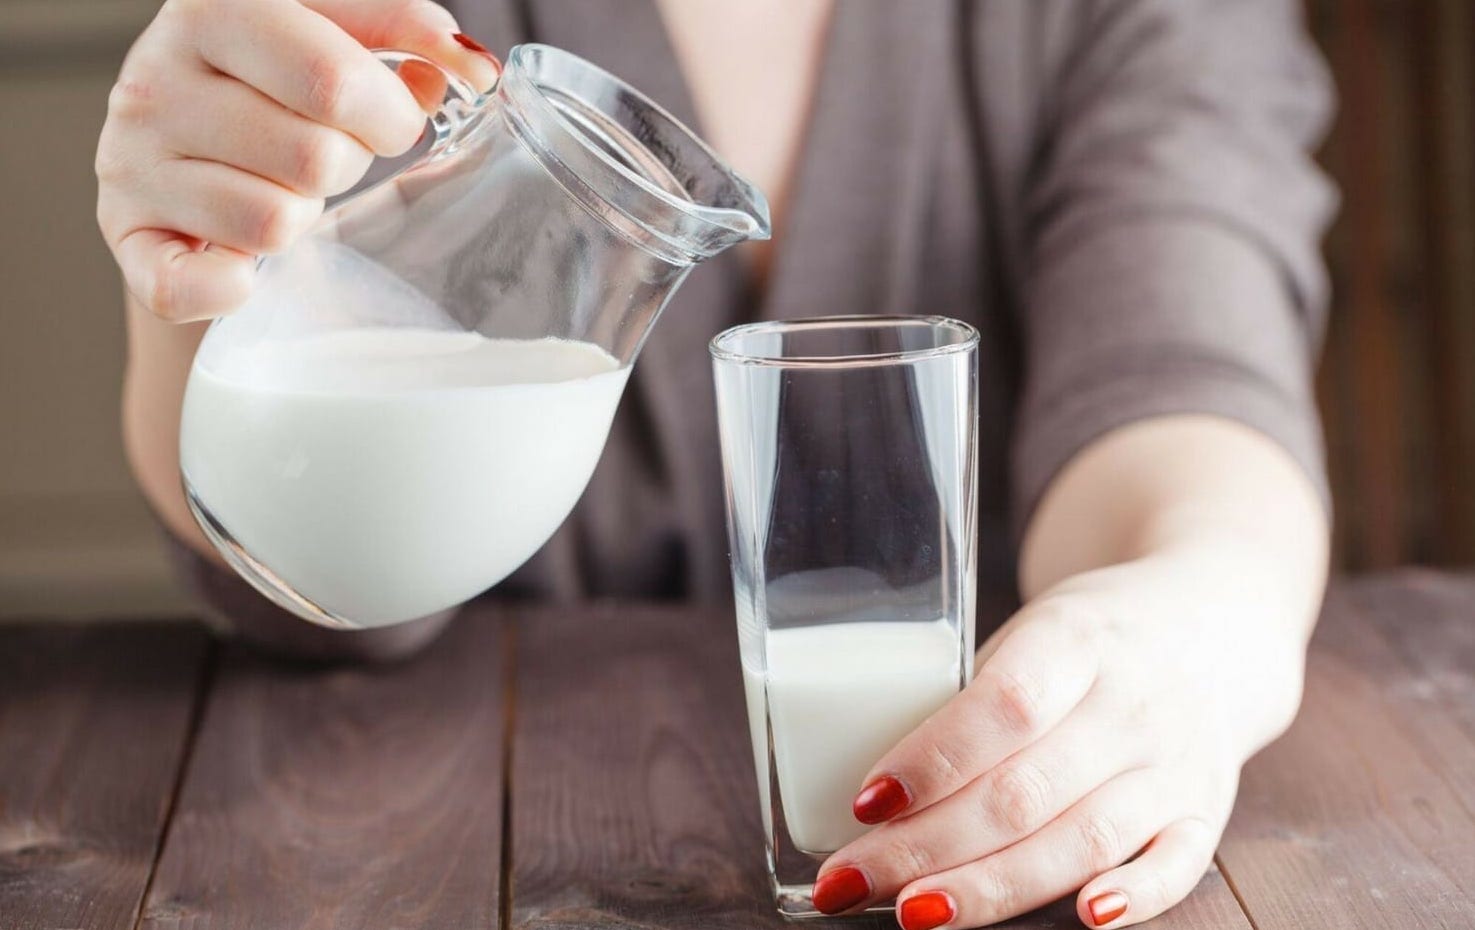 Rename These Common Foods to Find Out How Old You Are Inside Regular milk